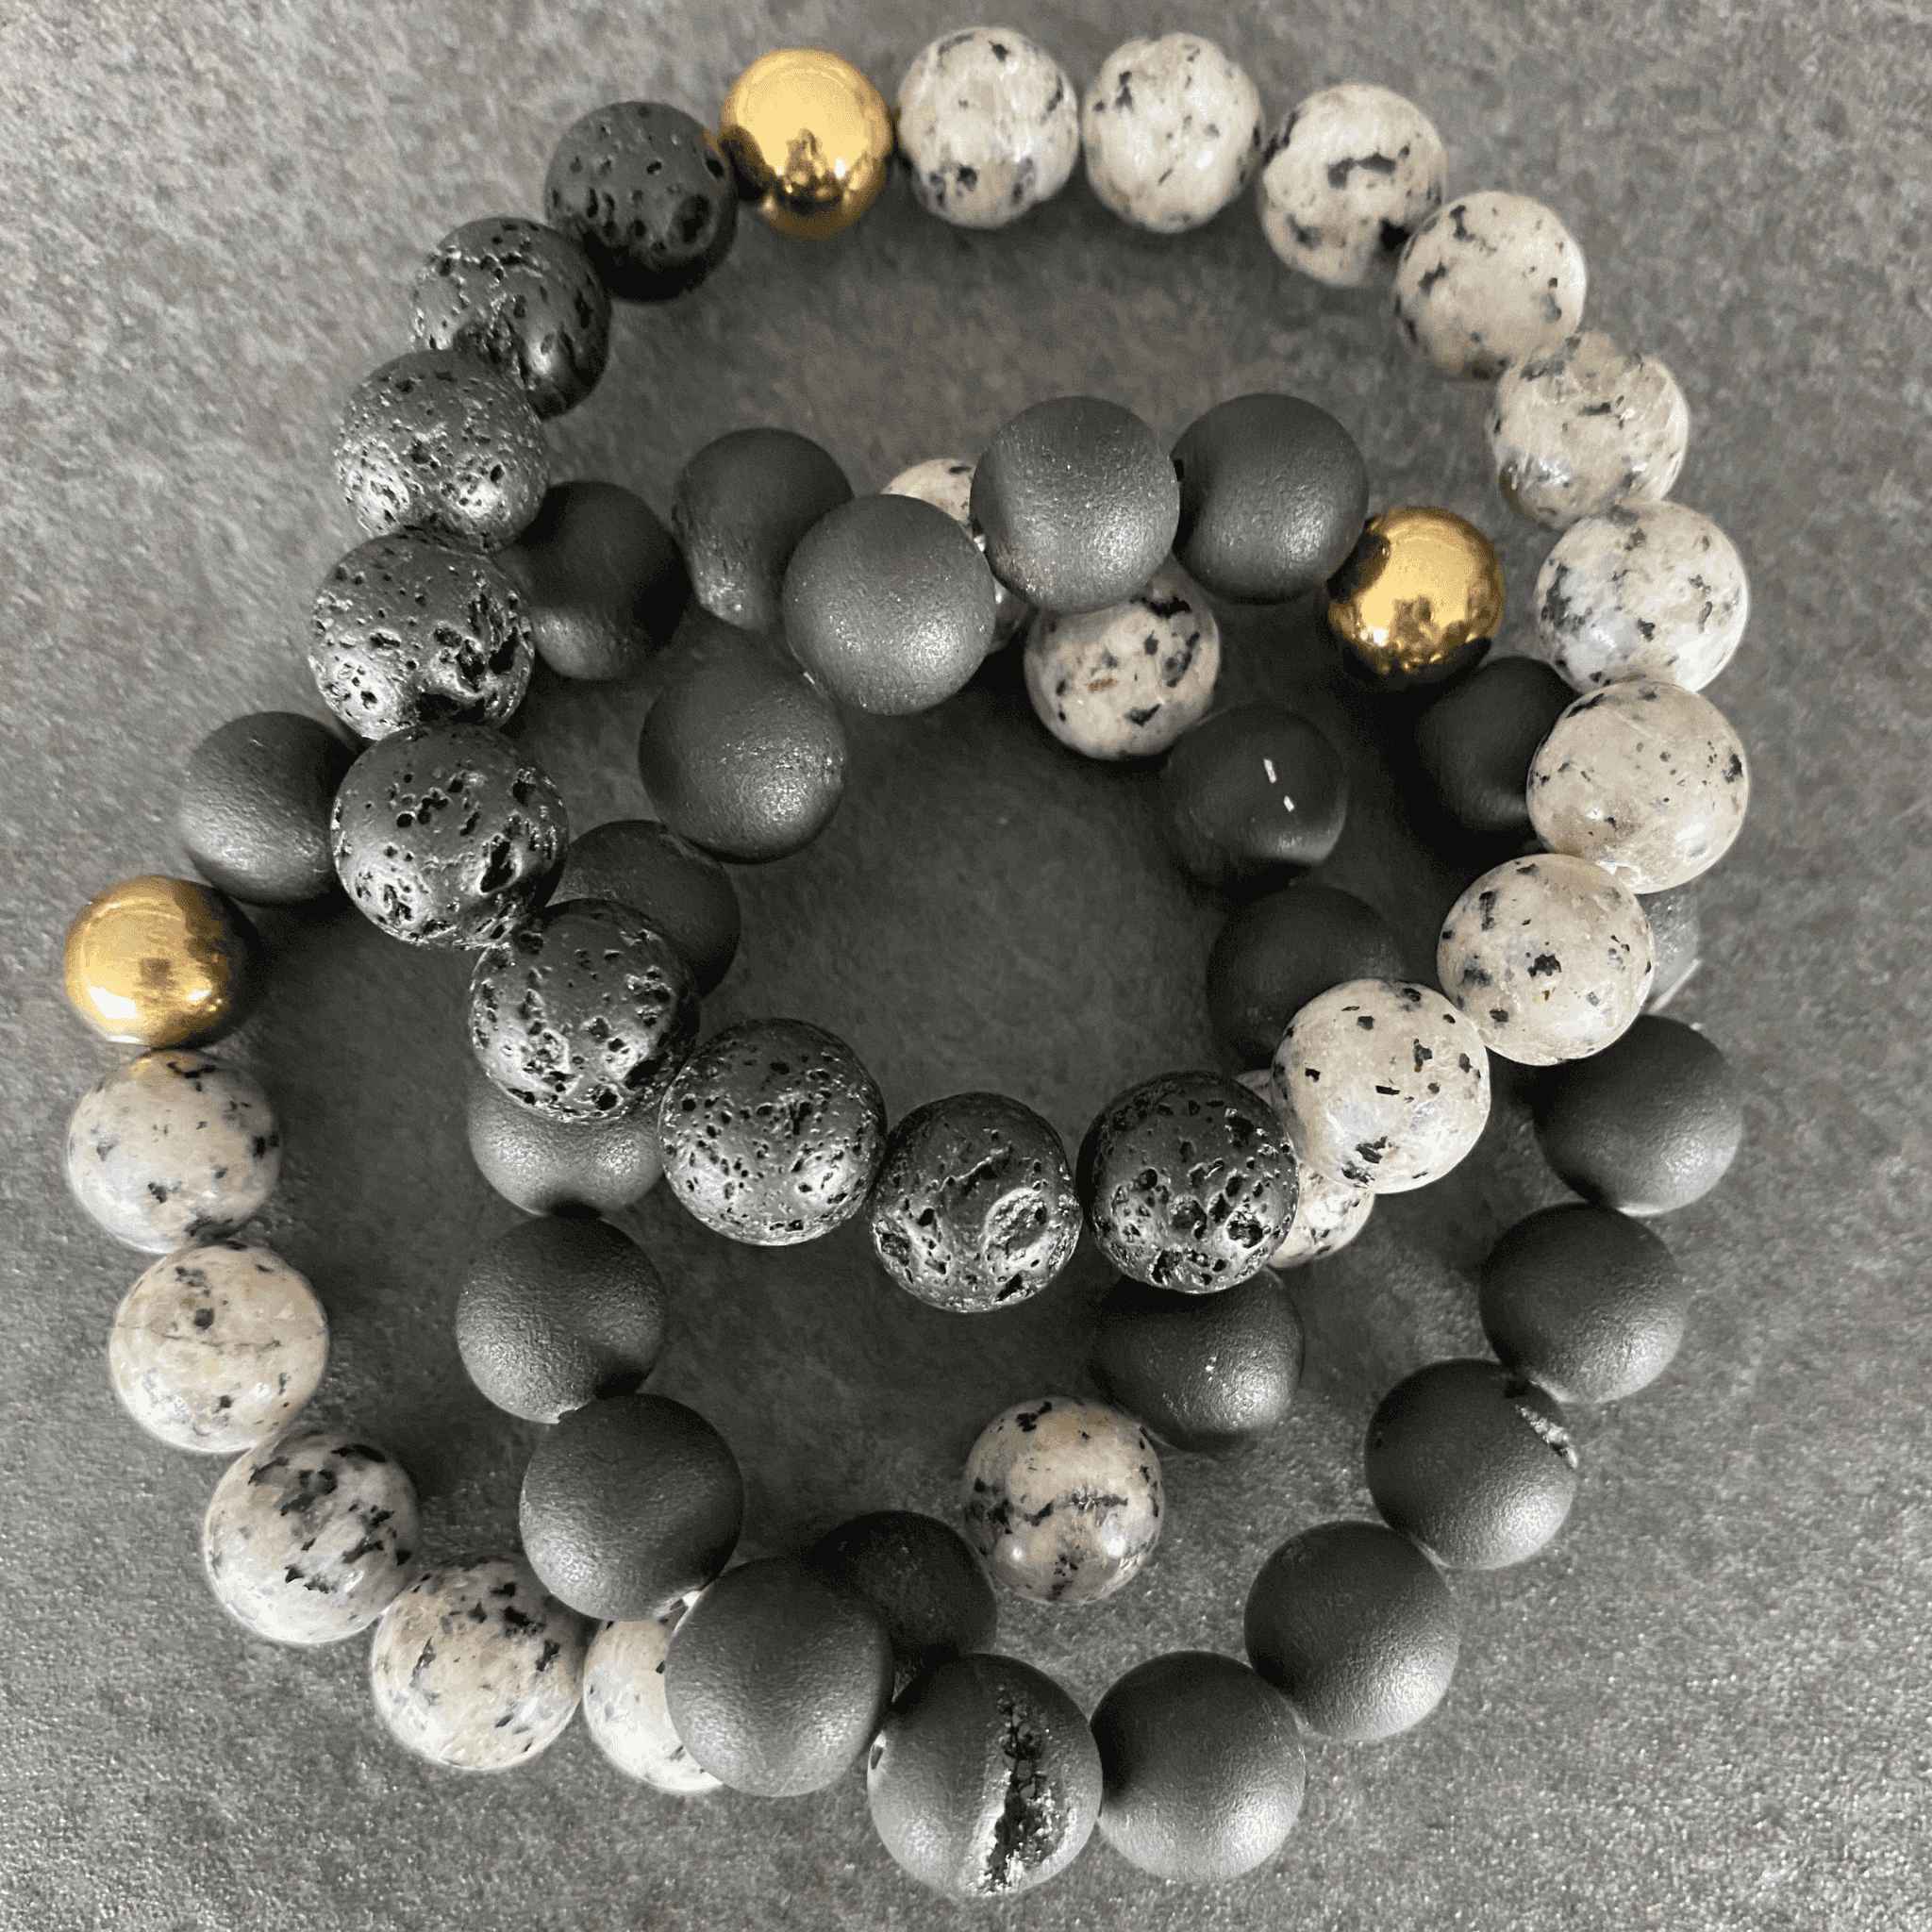 Close-up view of Black Lava Stone and Druzy Agate Bracelets, highlighting the porous black beads and shimmering druzy agate.